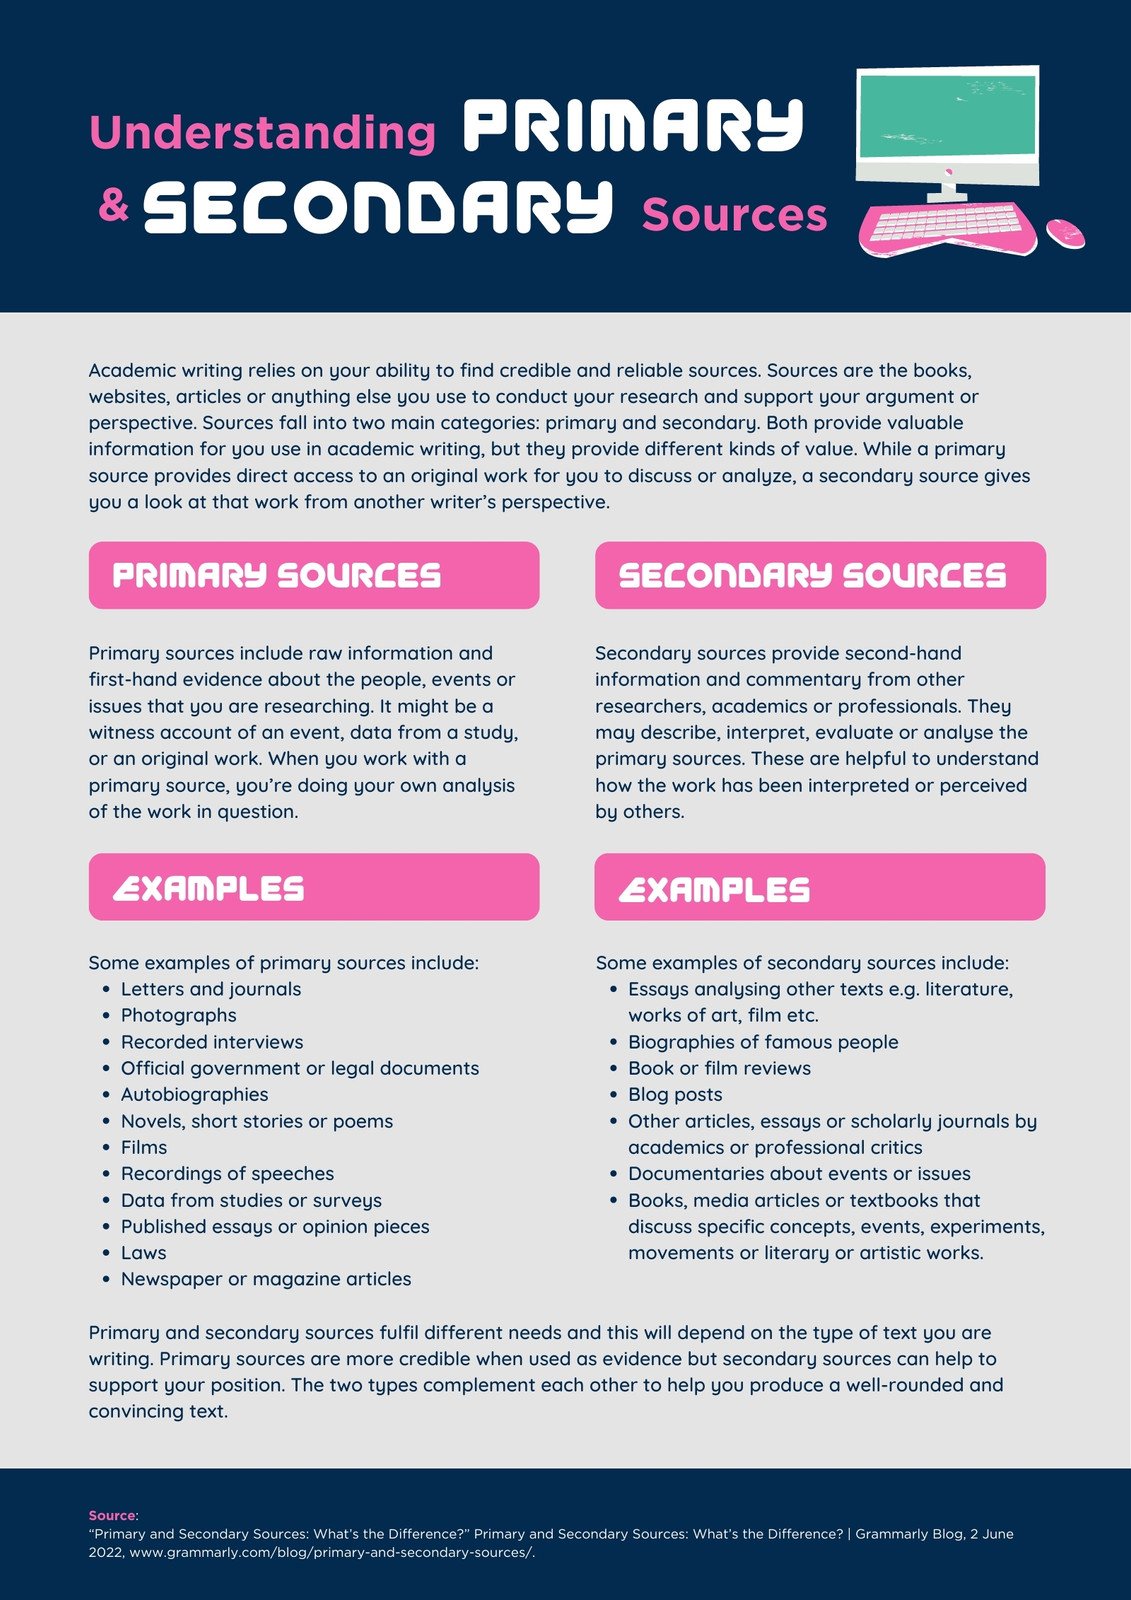 Understanding Primary and Secondary Sources English Research Poster in Navy Pink Digital Style